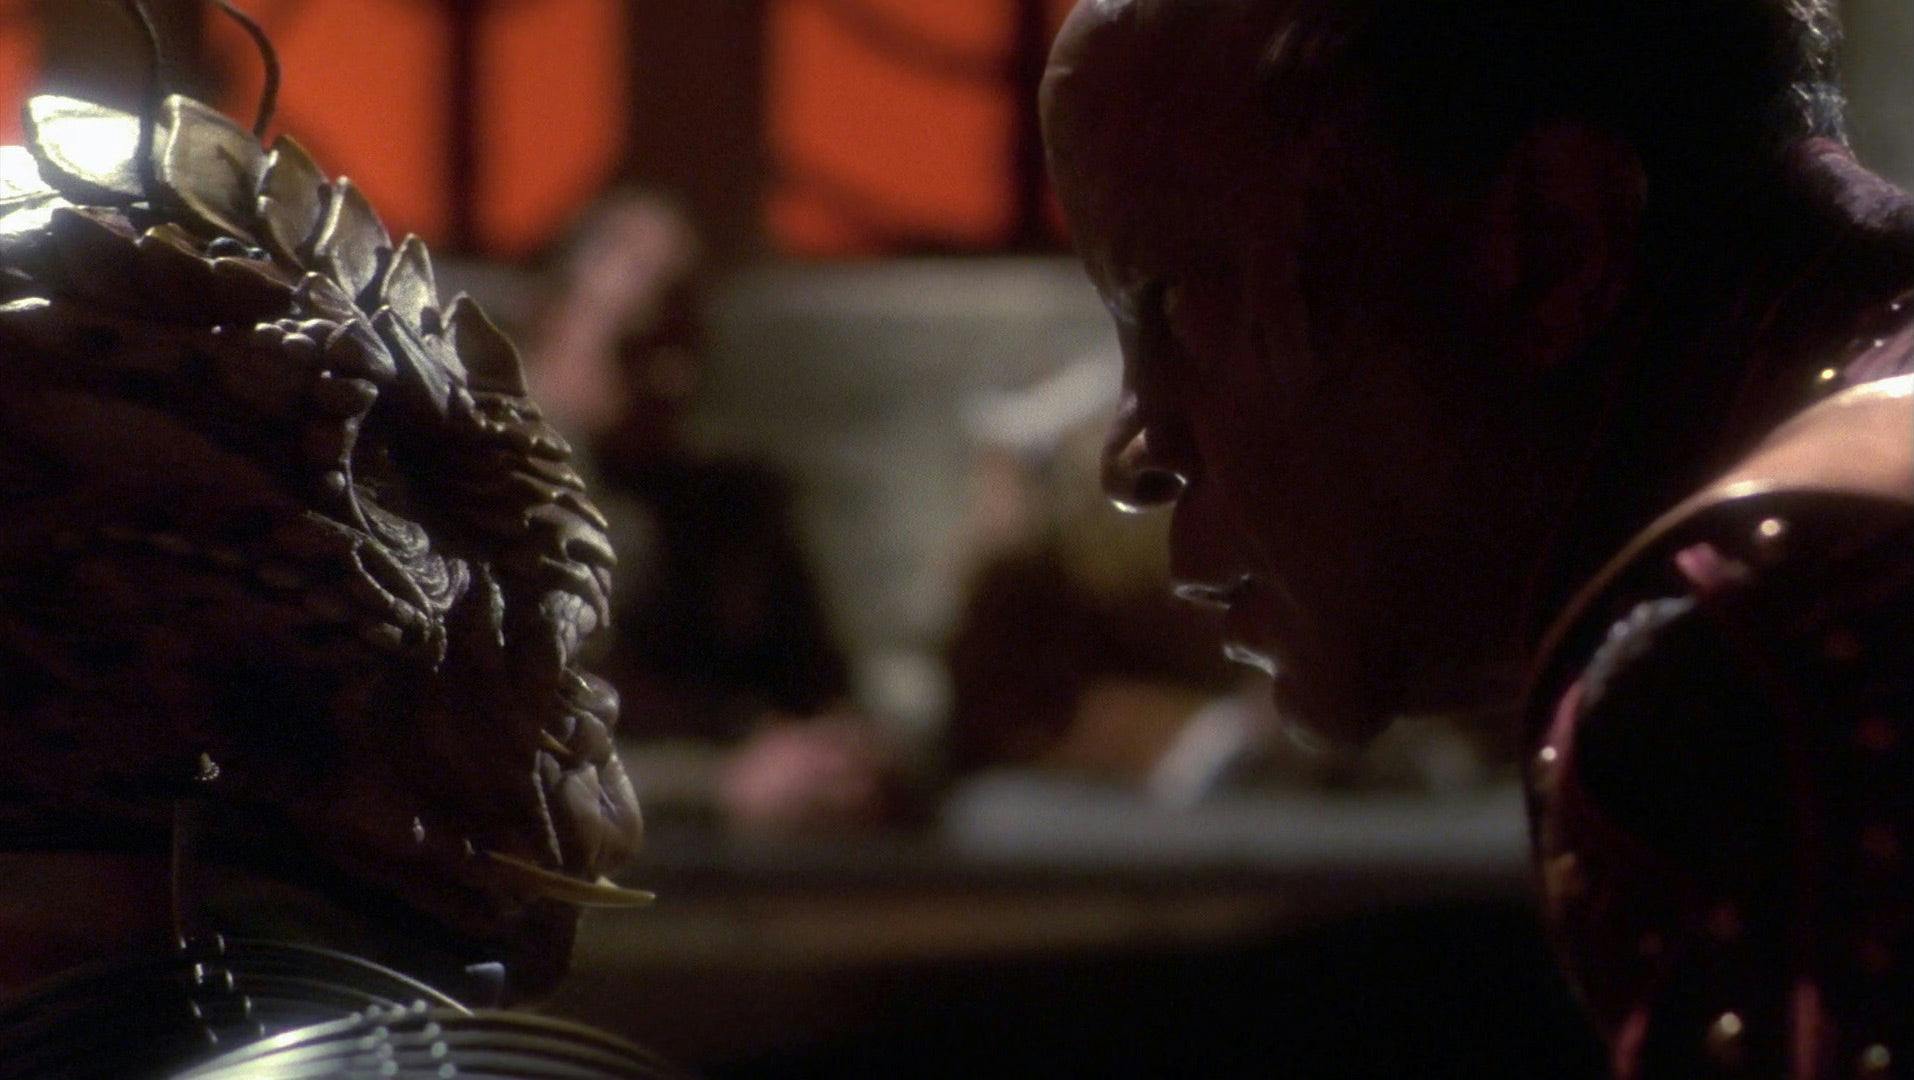 At the Xindi Council, a Primate looked down and talked with a Reptilian face to face on Star Trek: Enterprise